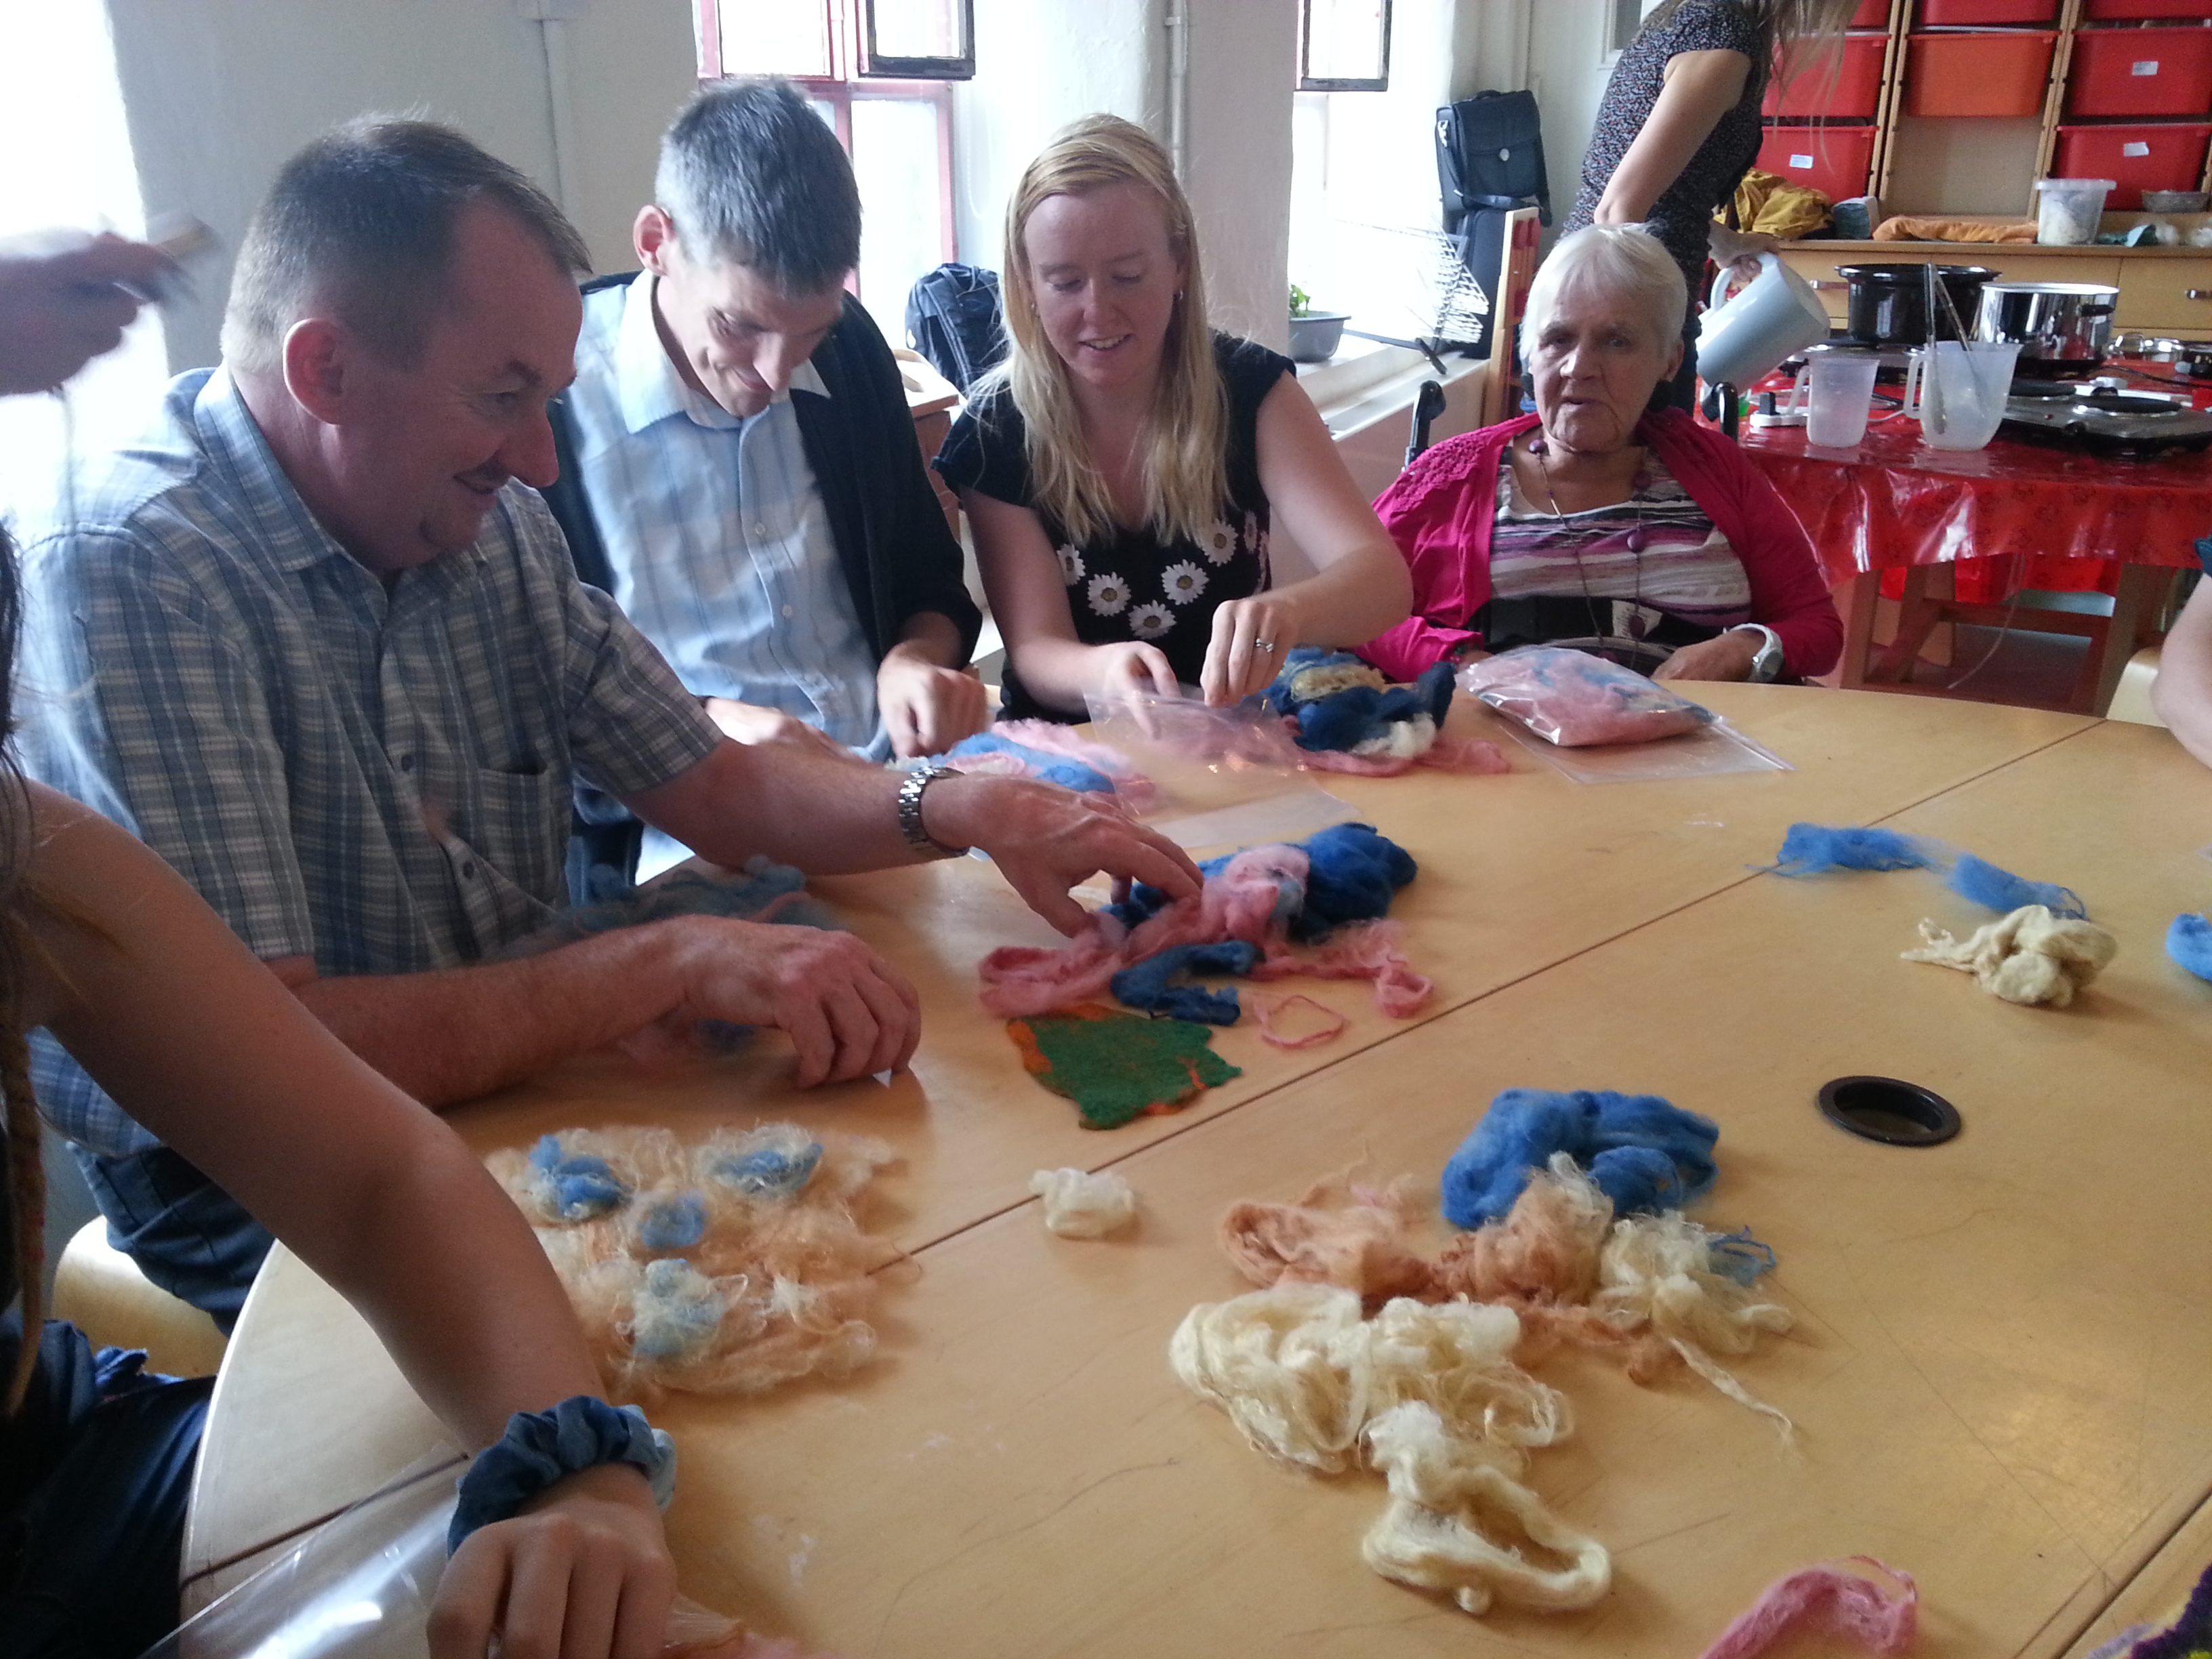 Community felting session with Debbie Tomkies of Making Futures